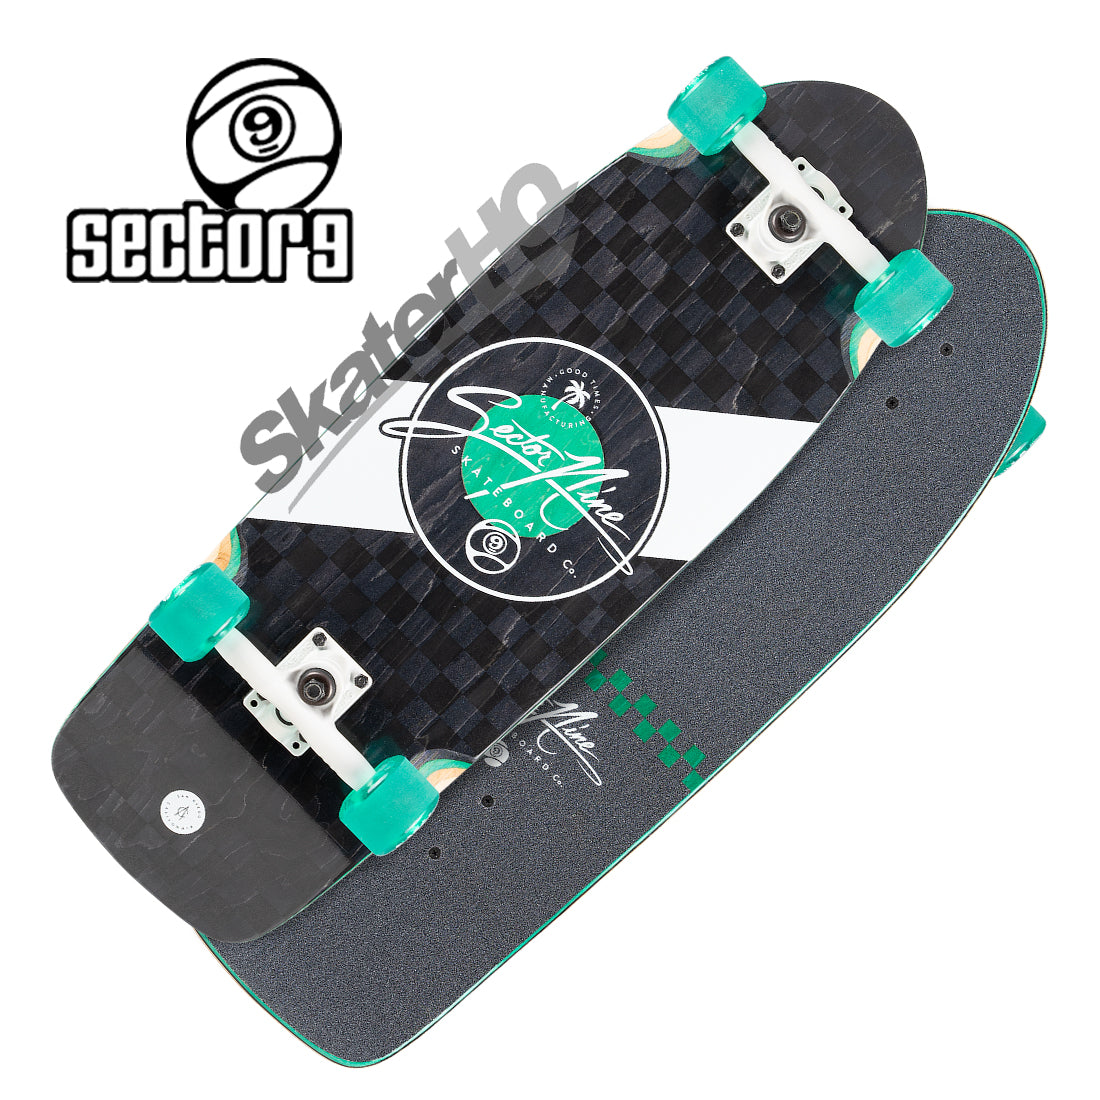 Sector 9 Fat Wave Mosaic 9.8x30 Complete - Black/Green Skateboard Compl Cruisers